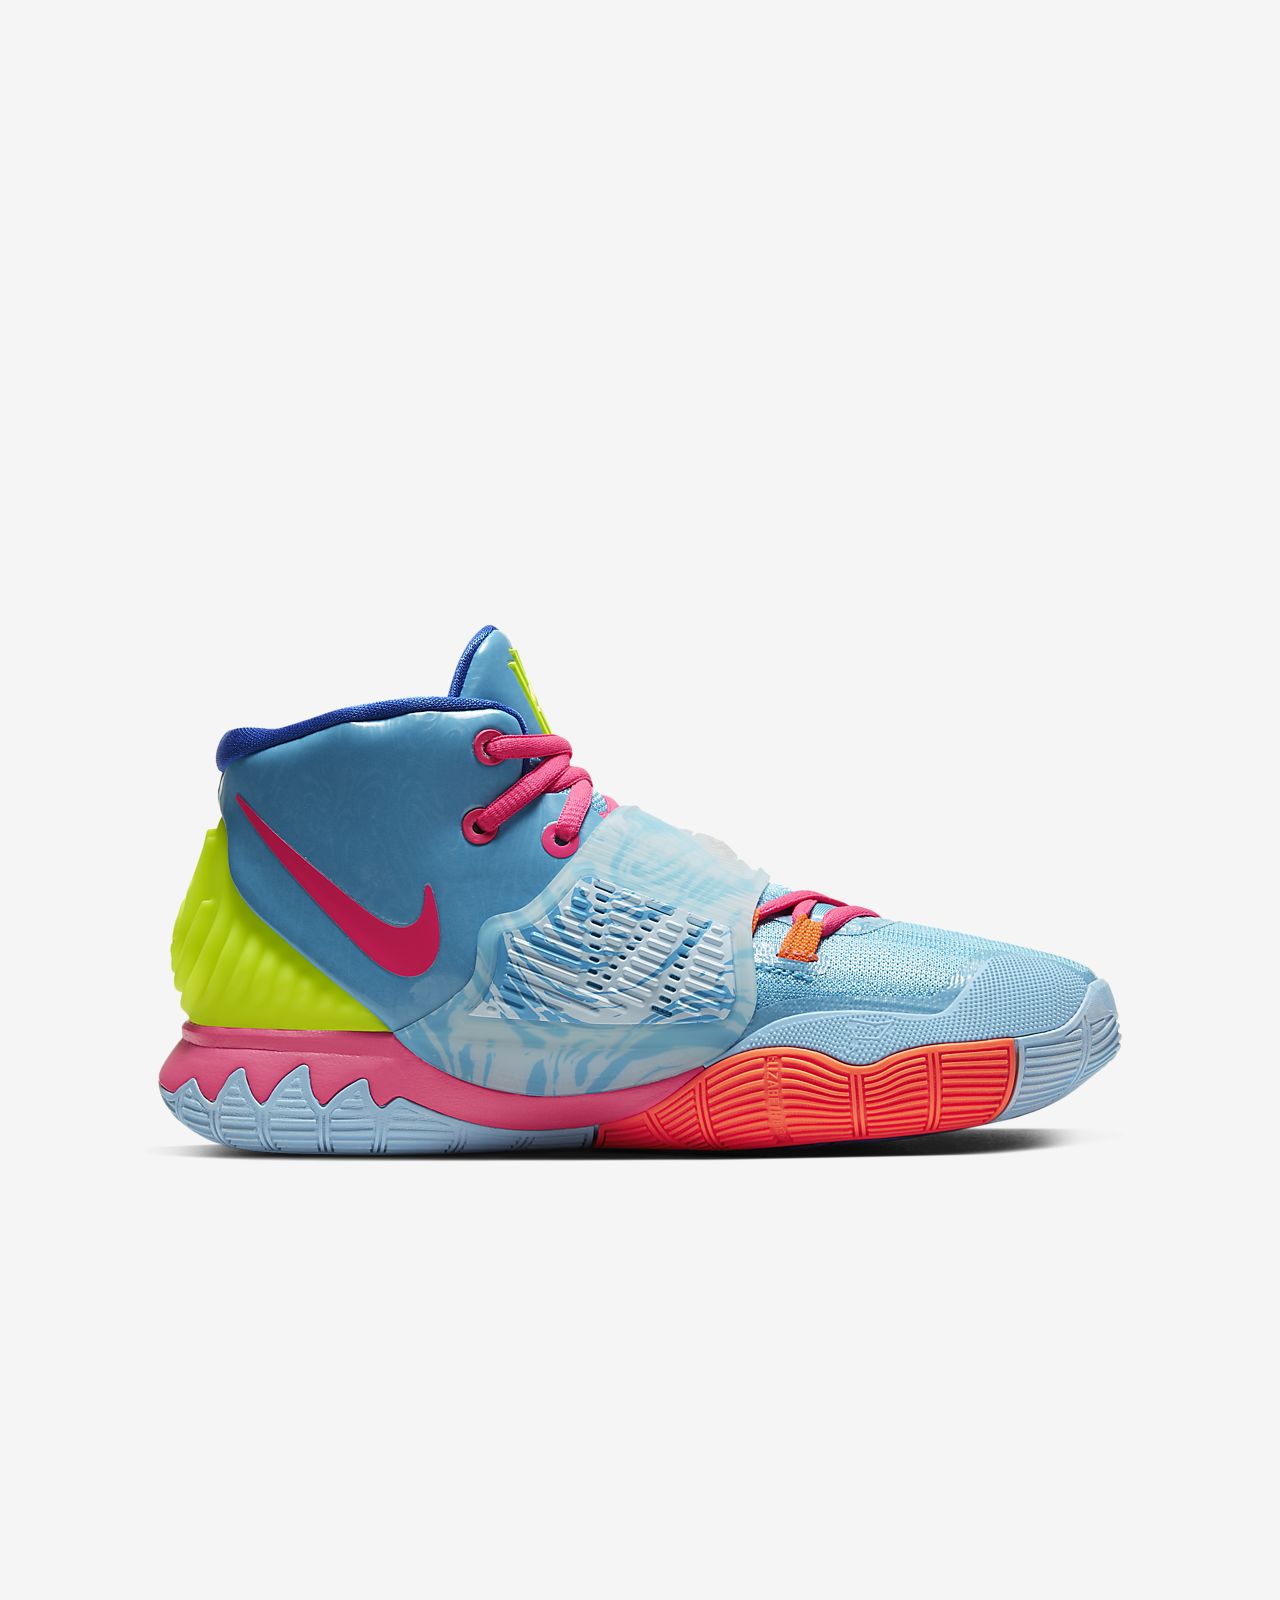 colorful kyrie 6